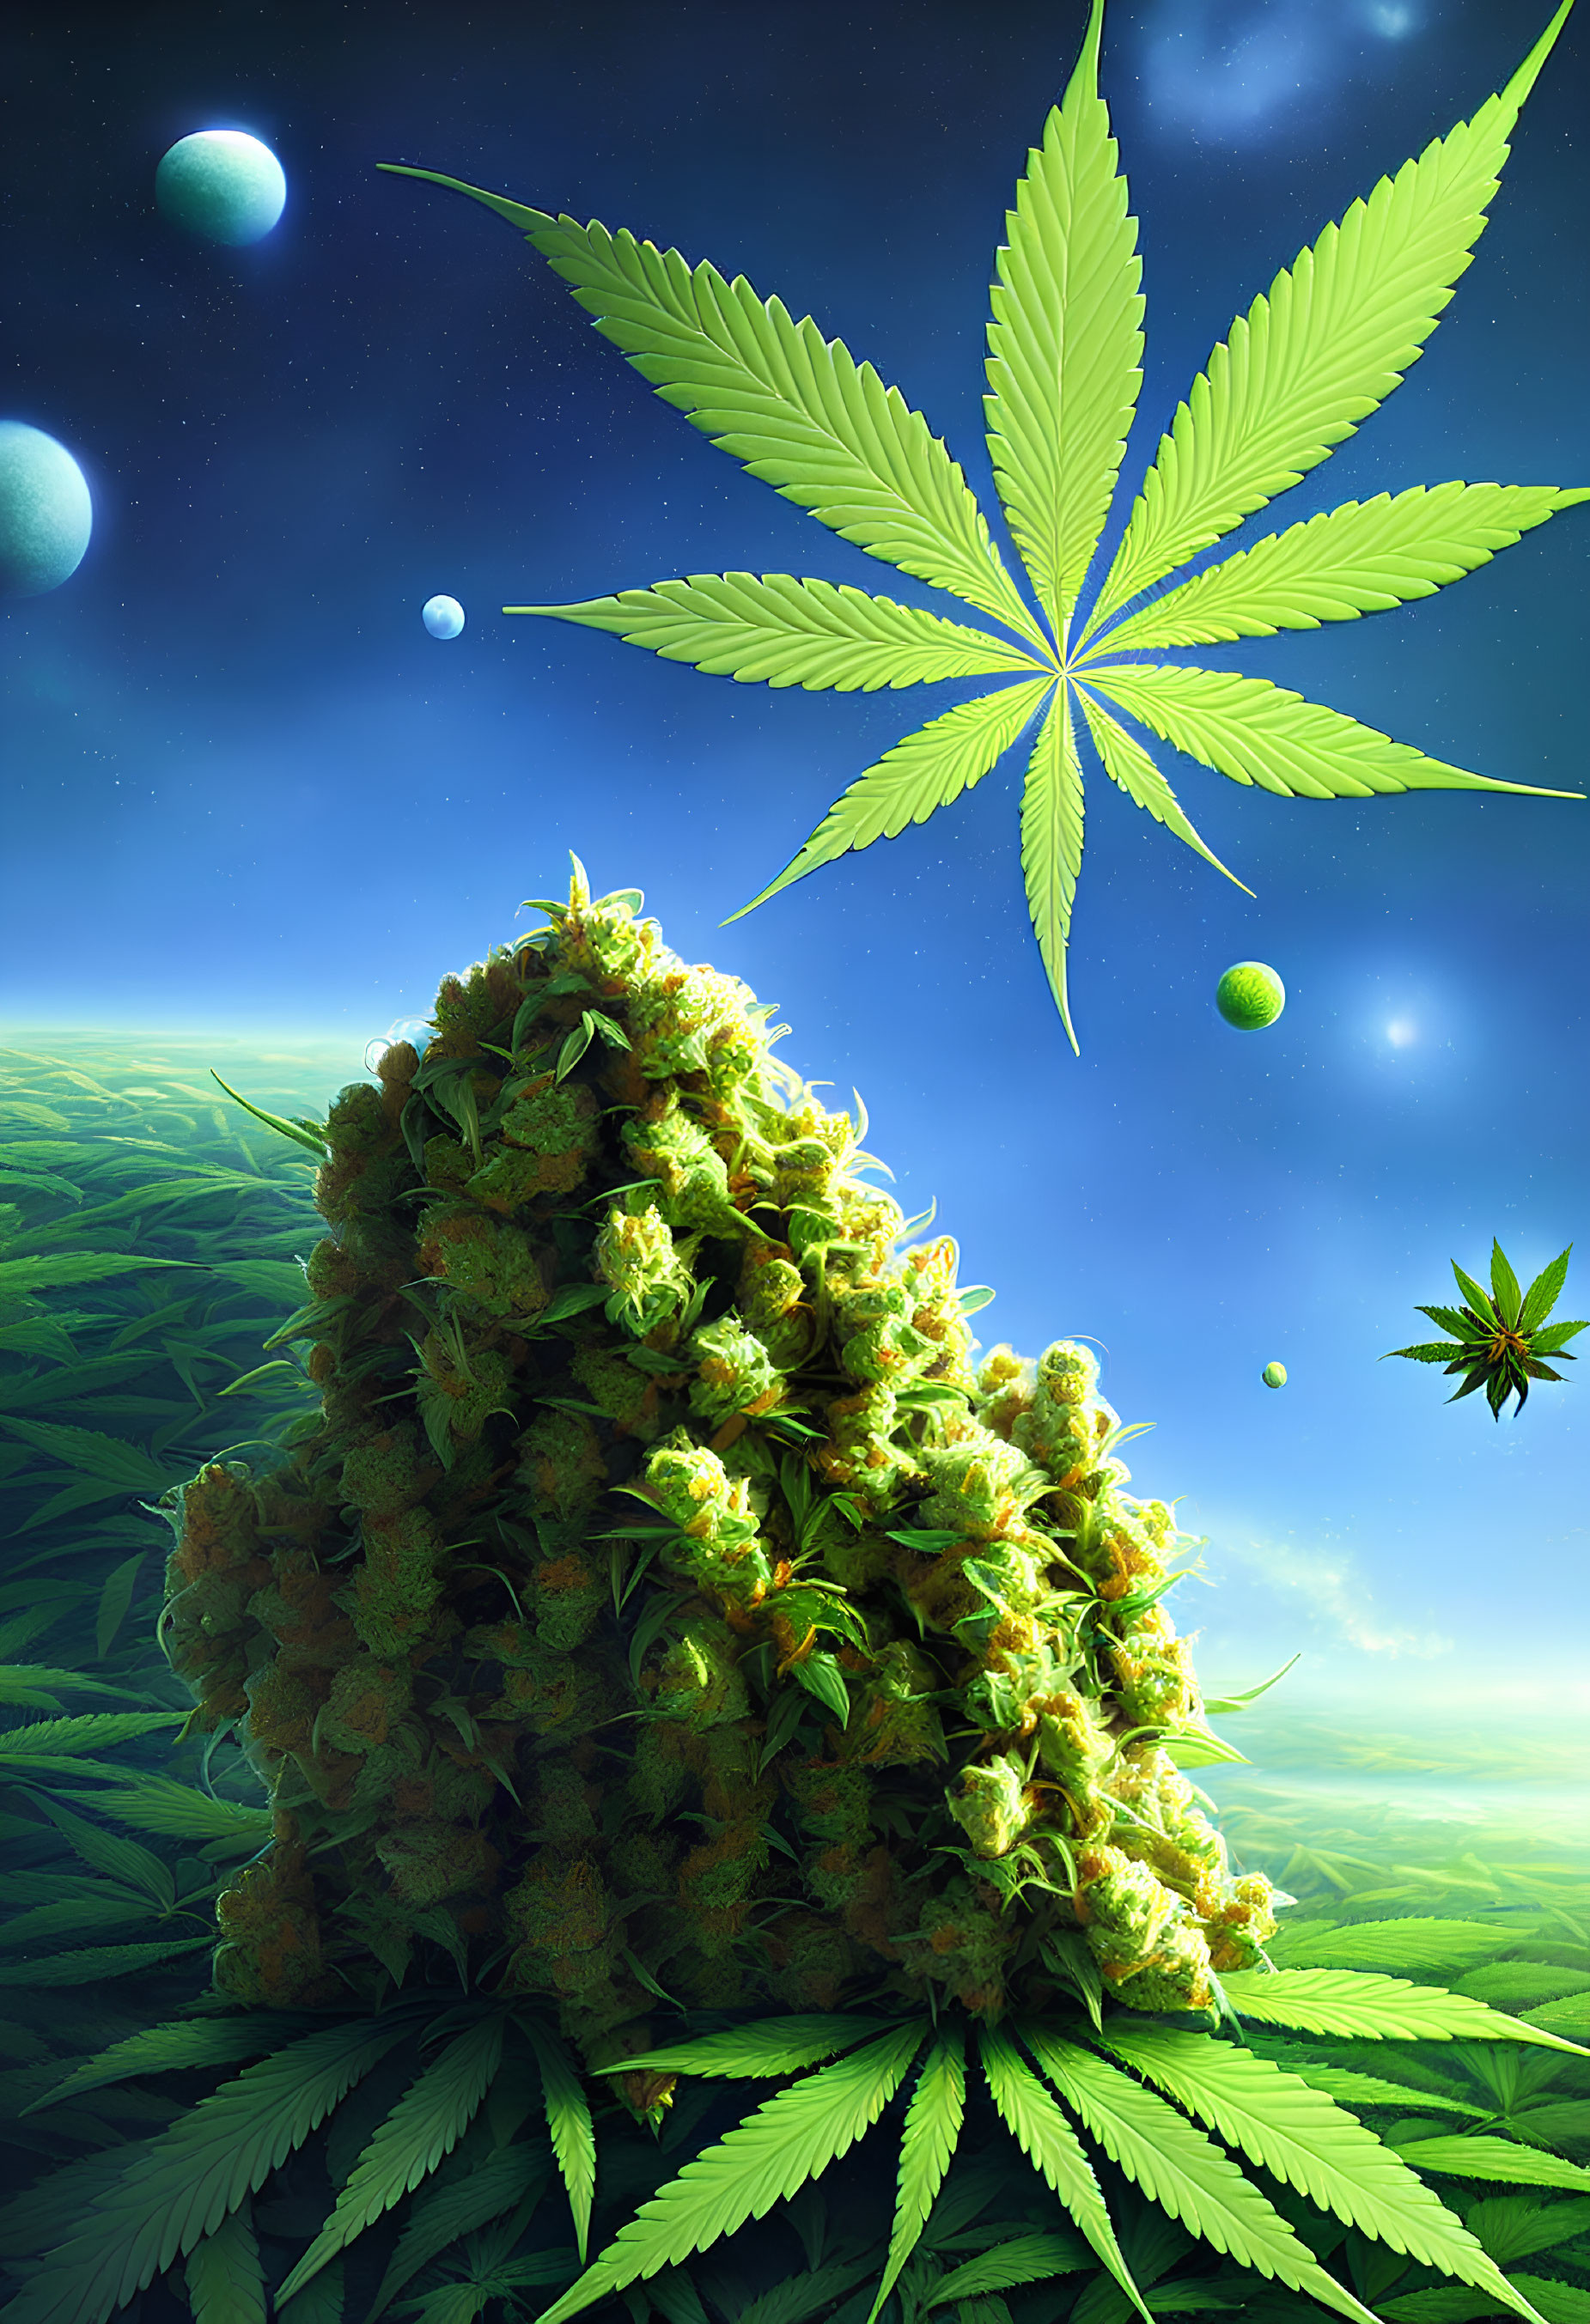 Cannabis plant artwork with large bud in surreal space theme